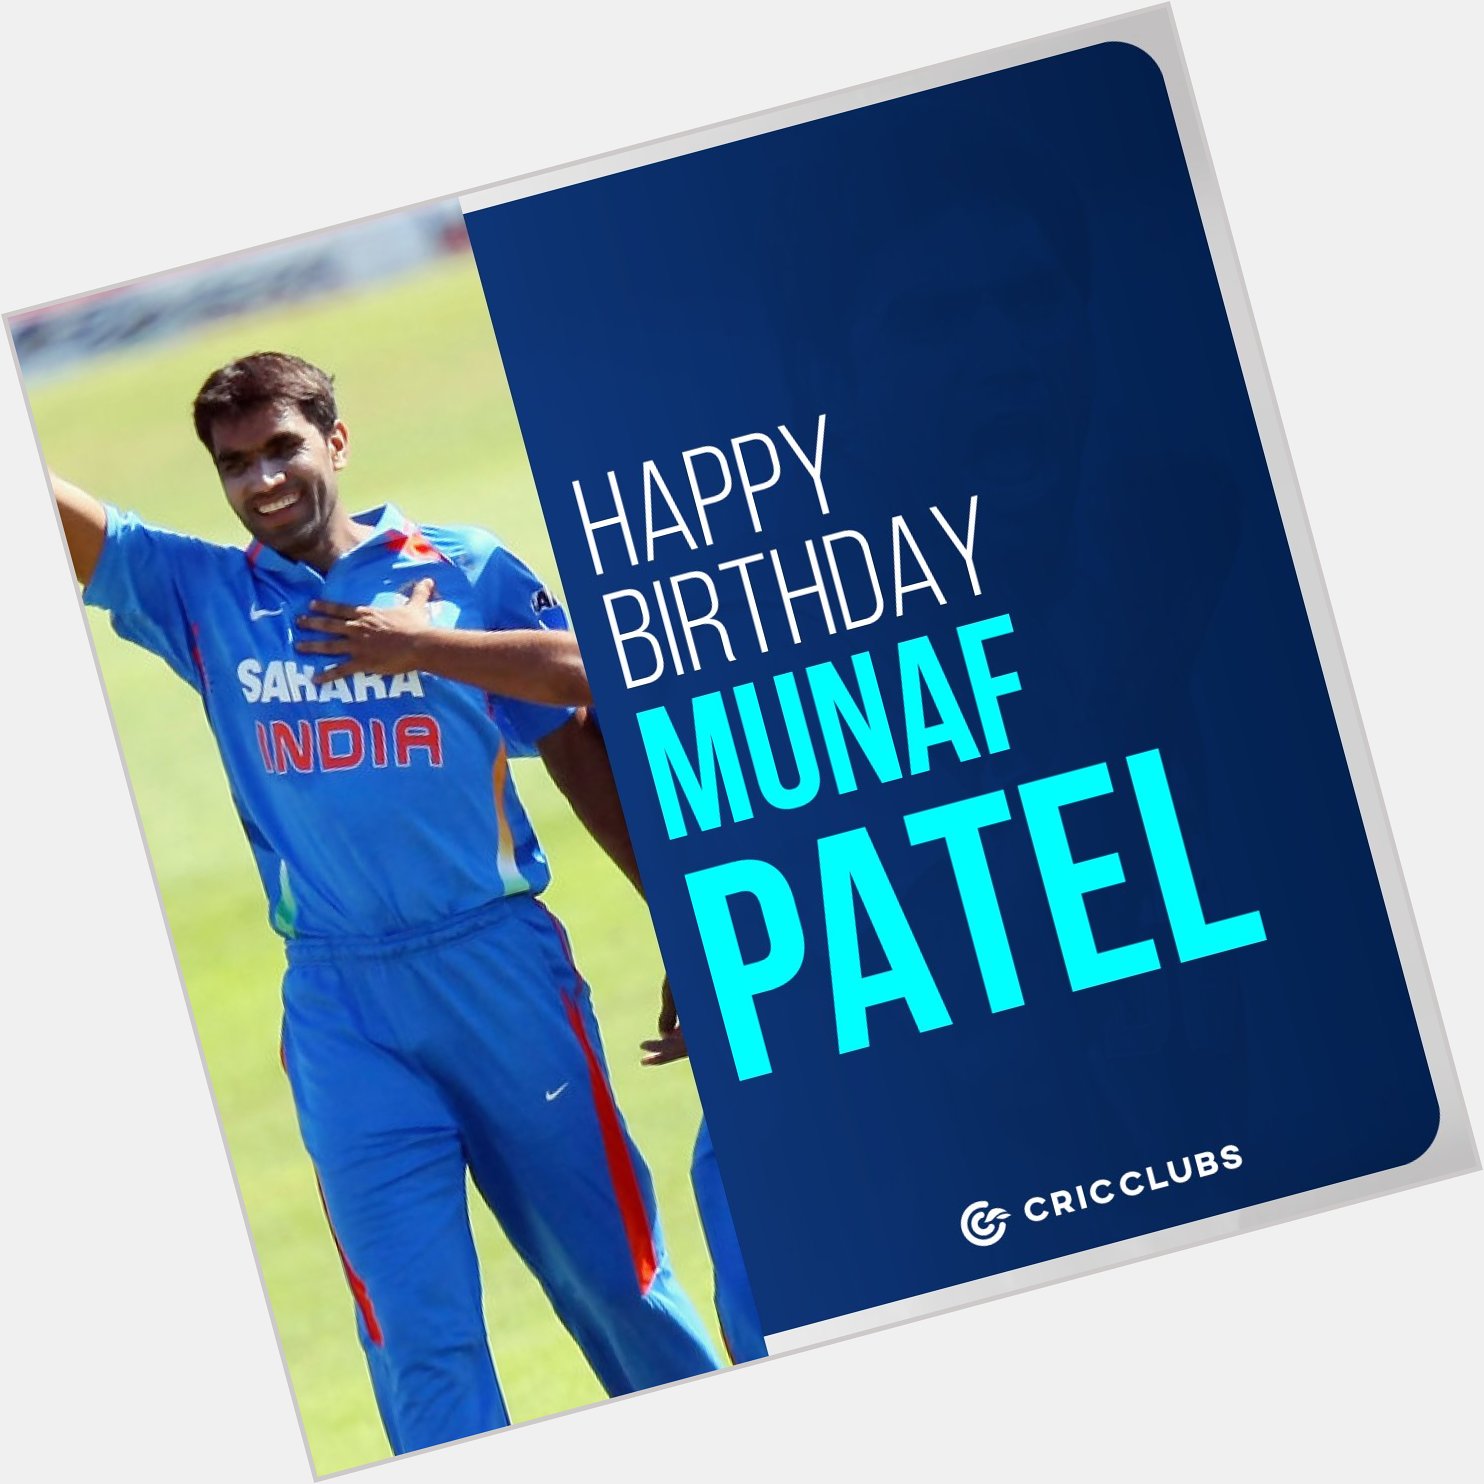 Wishing former Indian pacer Munaf Patel a very happy birthday.    